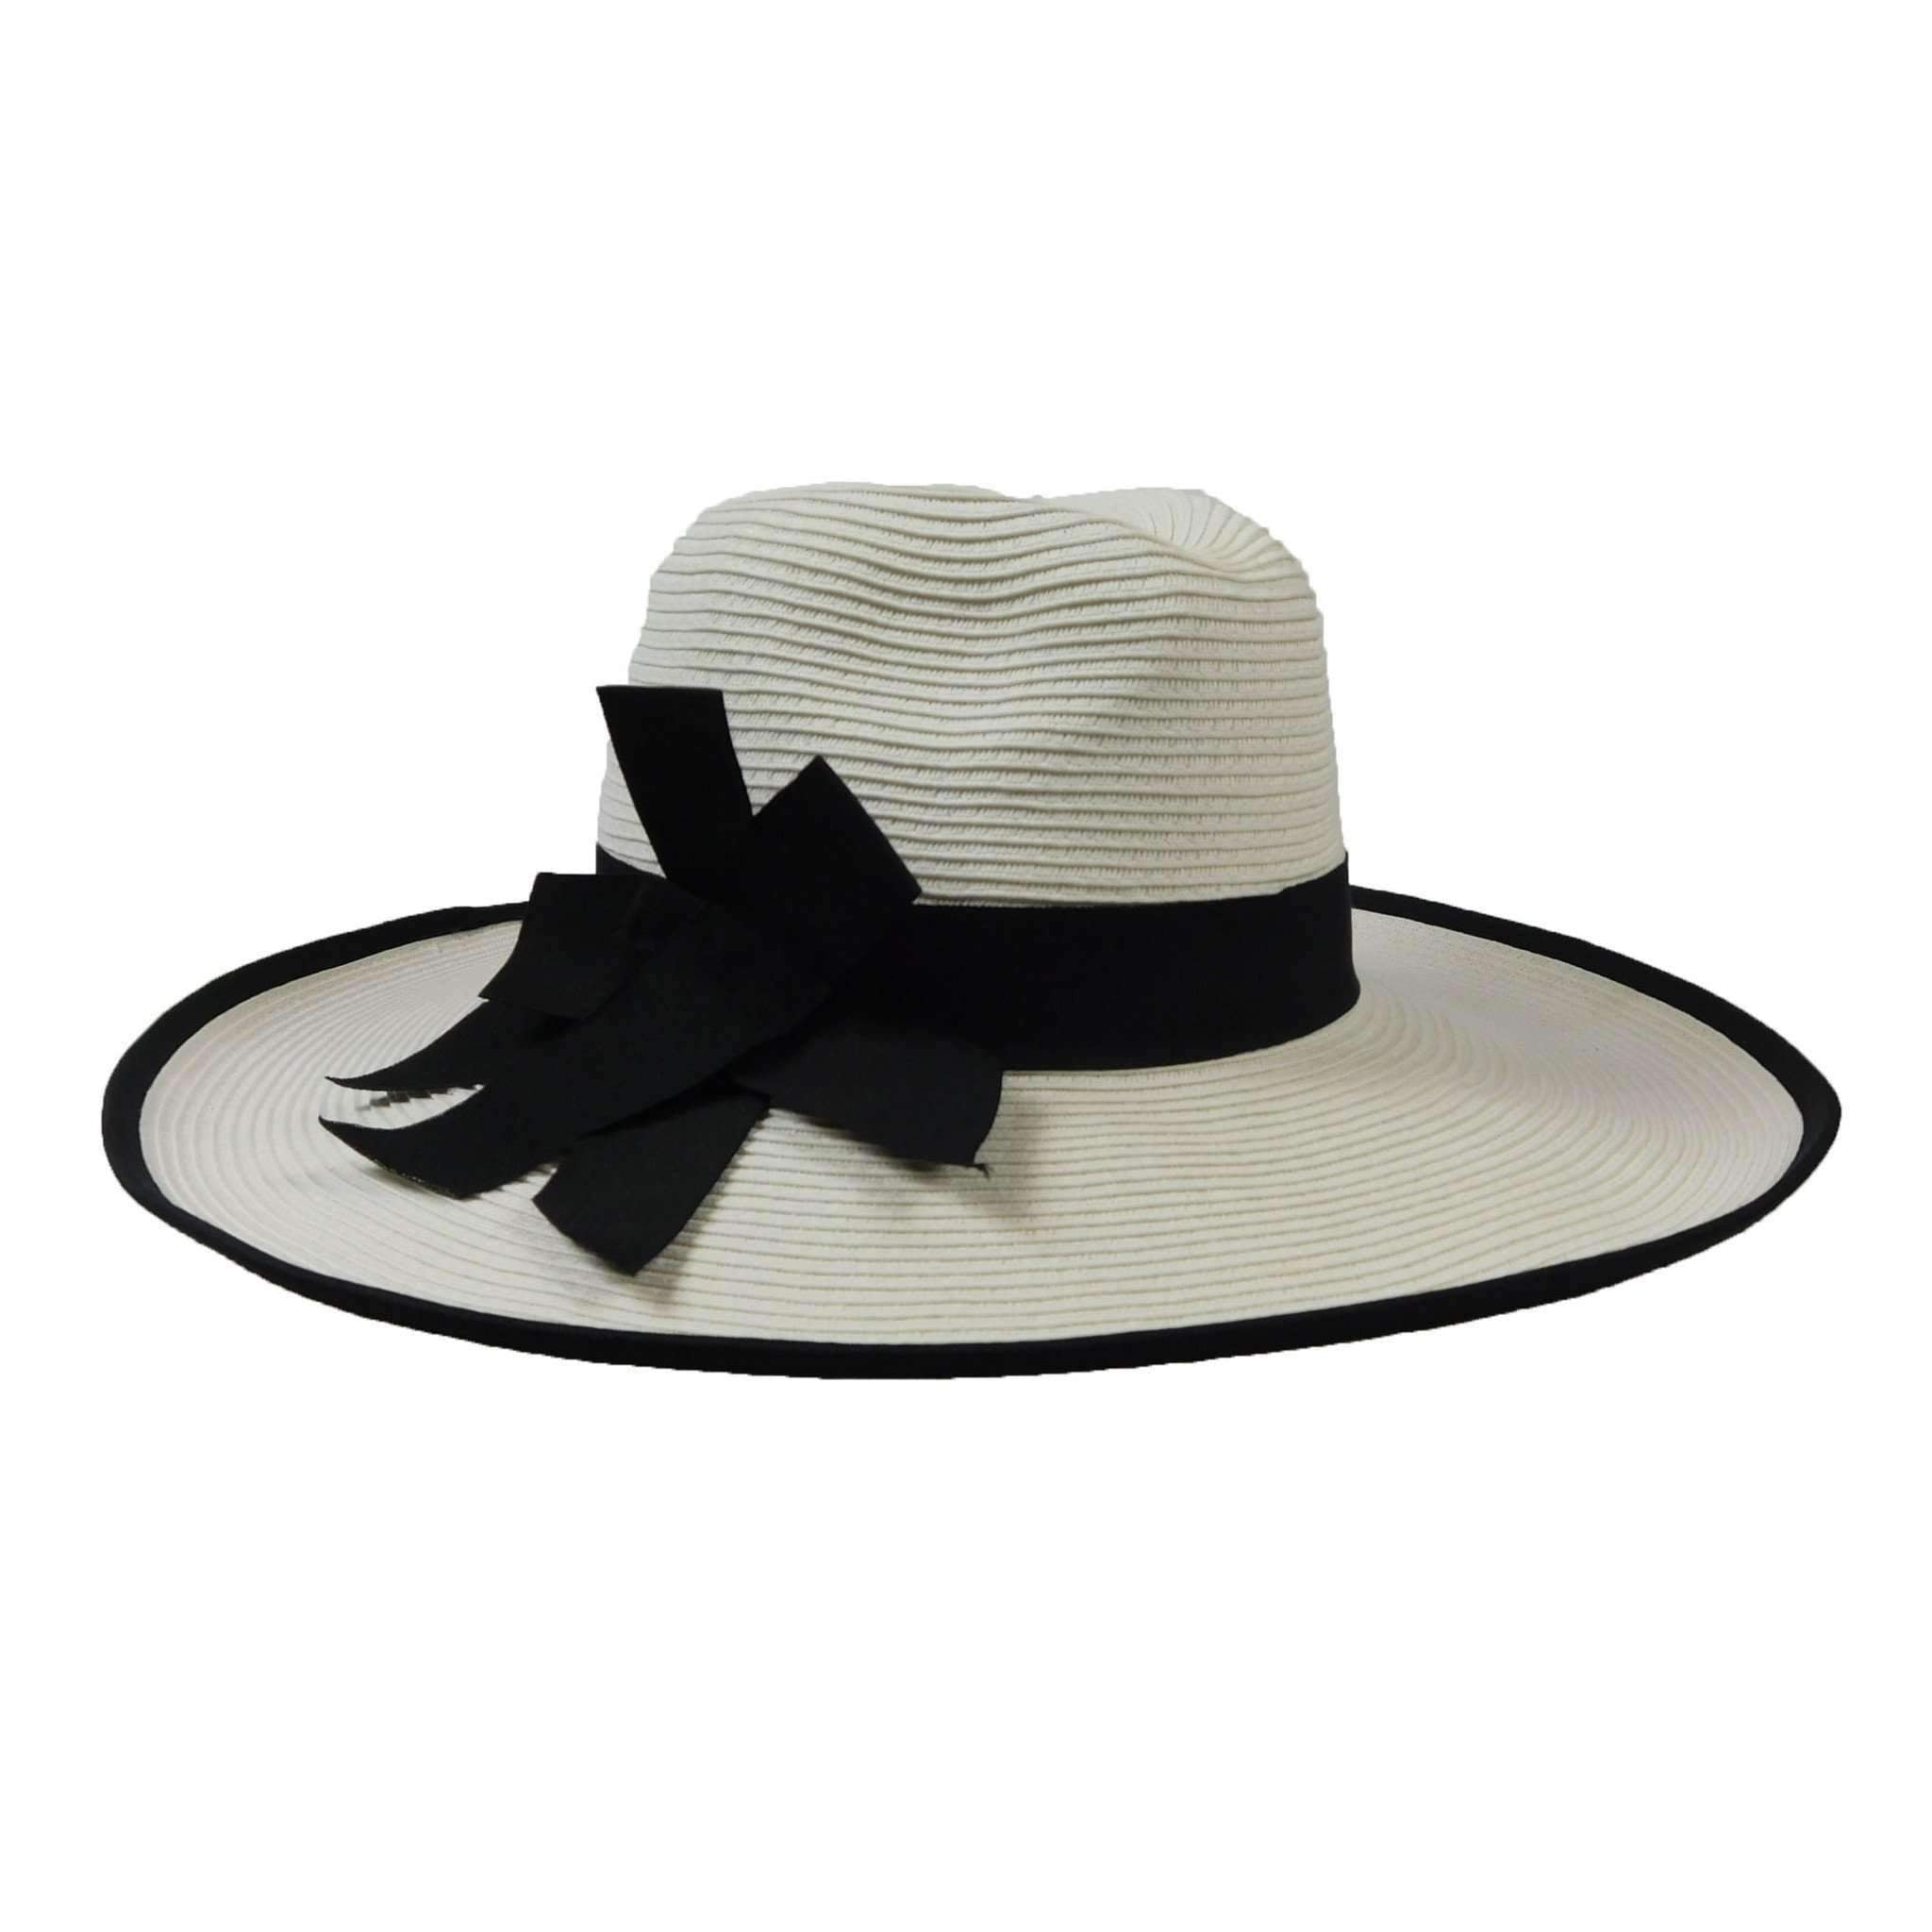 Elegant Wide Brim Straw Hat - Large and Extra-Large Size Safari Hat Jeanne Simmons js8001whL White Large (59 cm) 